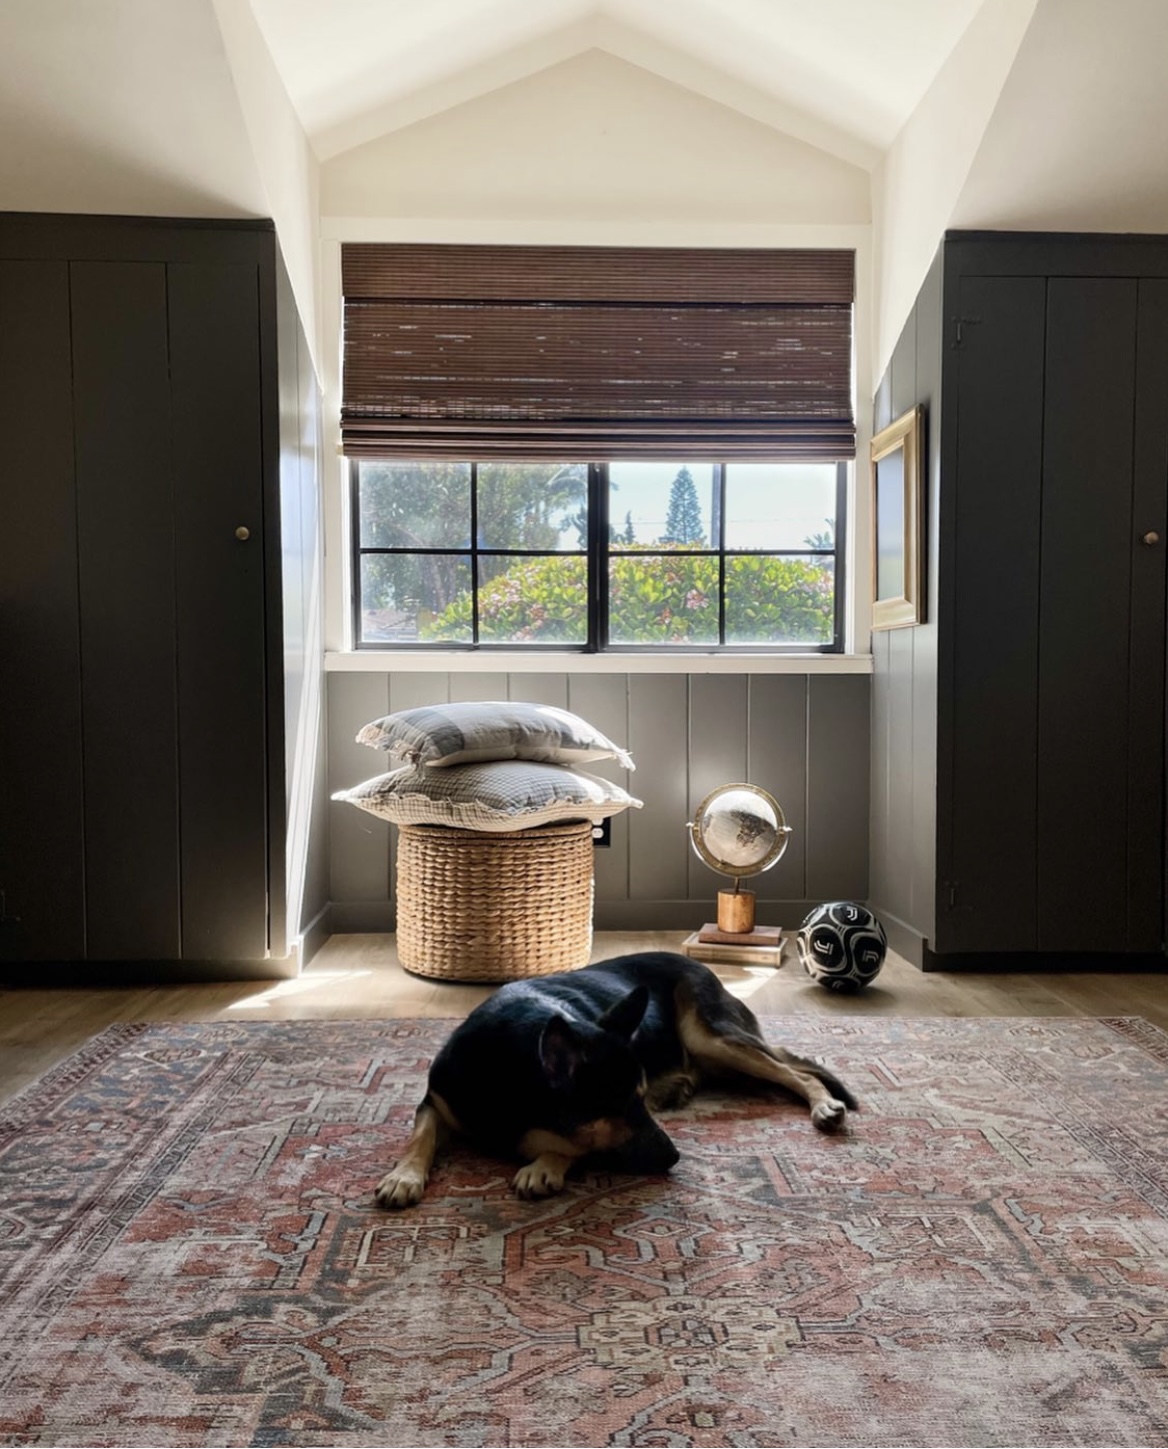 Boys soccer room, kids soccer themed room, kendall charcoal benjamin moore, dark gray paint, black paint, shiplap walls, dunn edwards swiss coffee paint, built in closets, window in middle of closet, wooden woven shades, interior dormer window, vintage rug, laminate floors